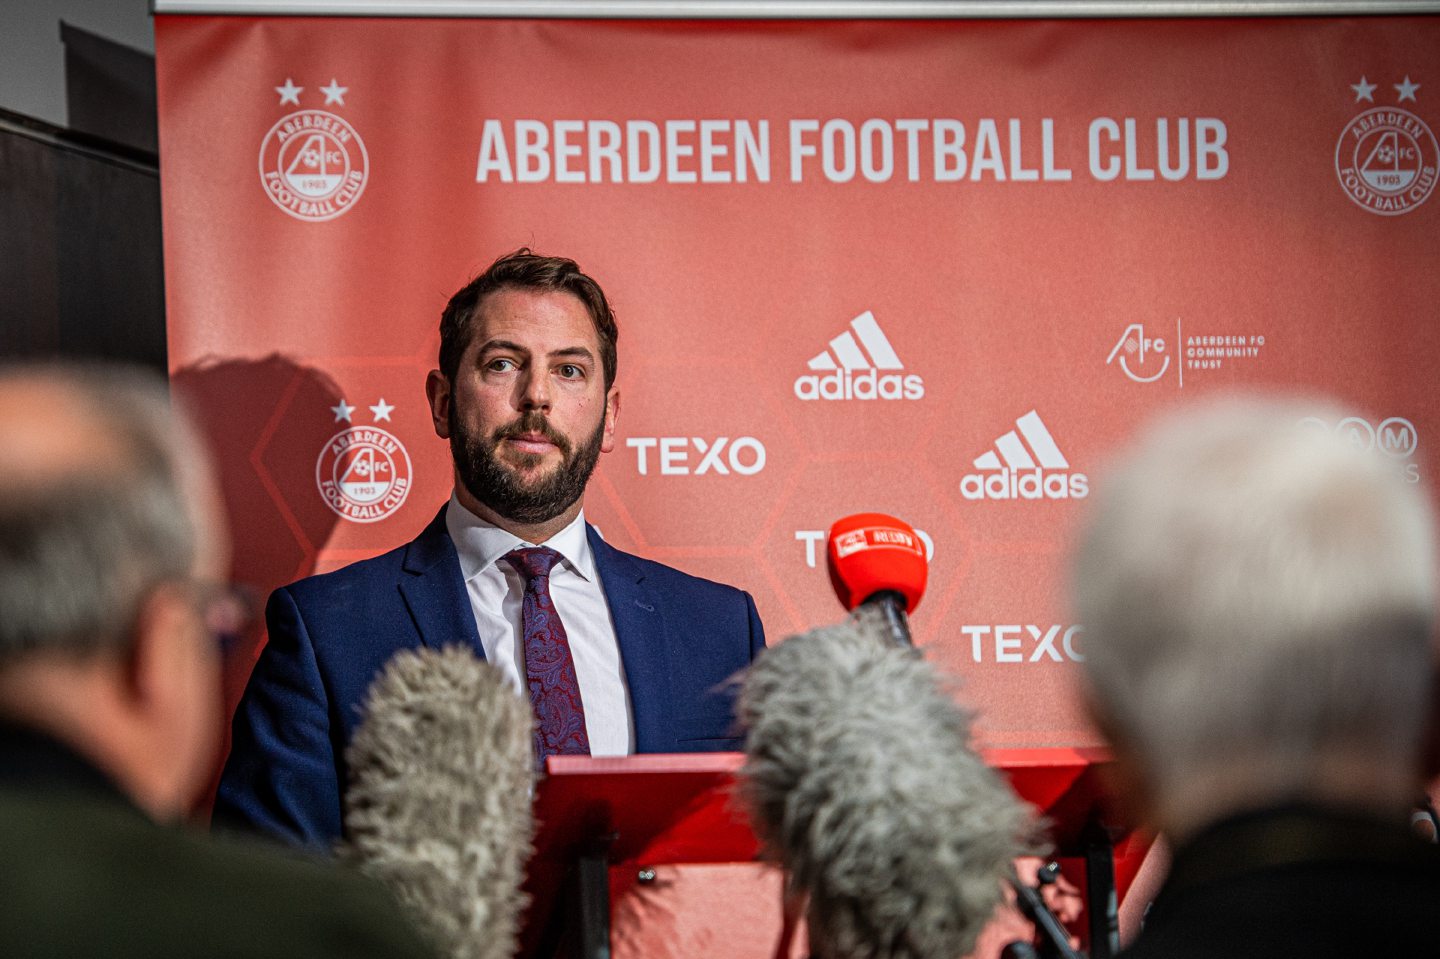 AGCC policy adviser Fergus Mutch presented the economic impact report, projected a new Aberdeen FC stadium at the beach could be worth £1bn for the city. Image: Wullie Marr/DC Thomson.